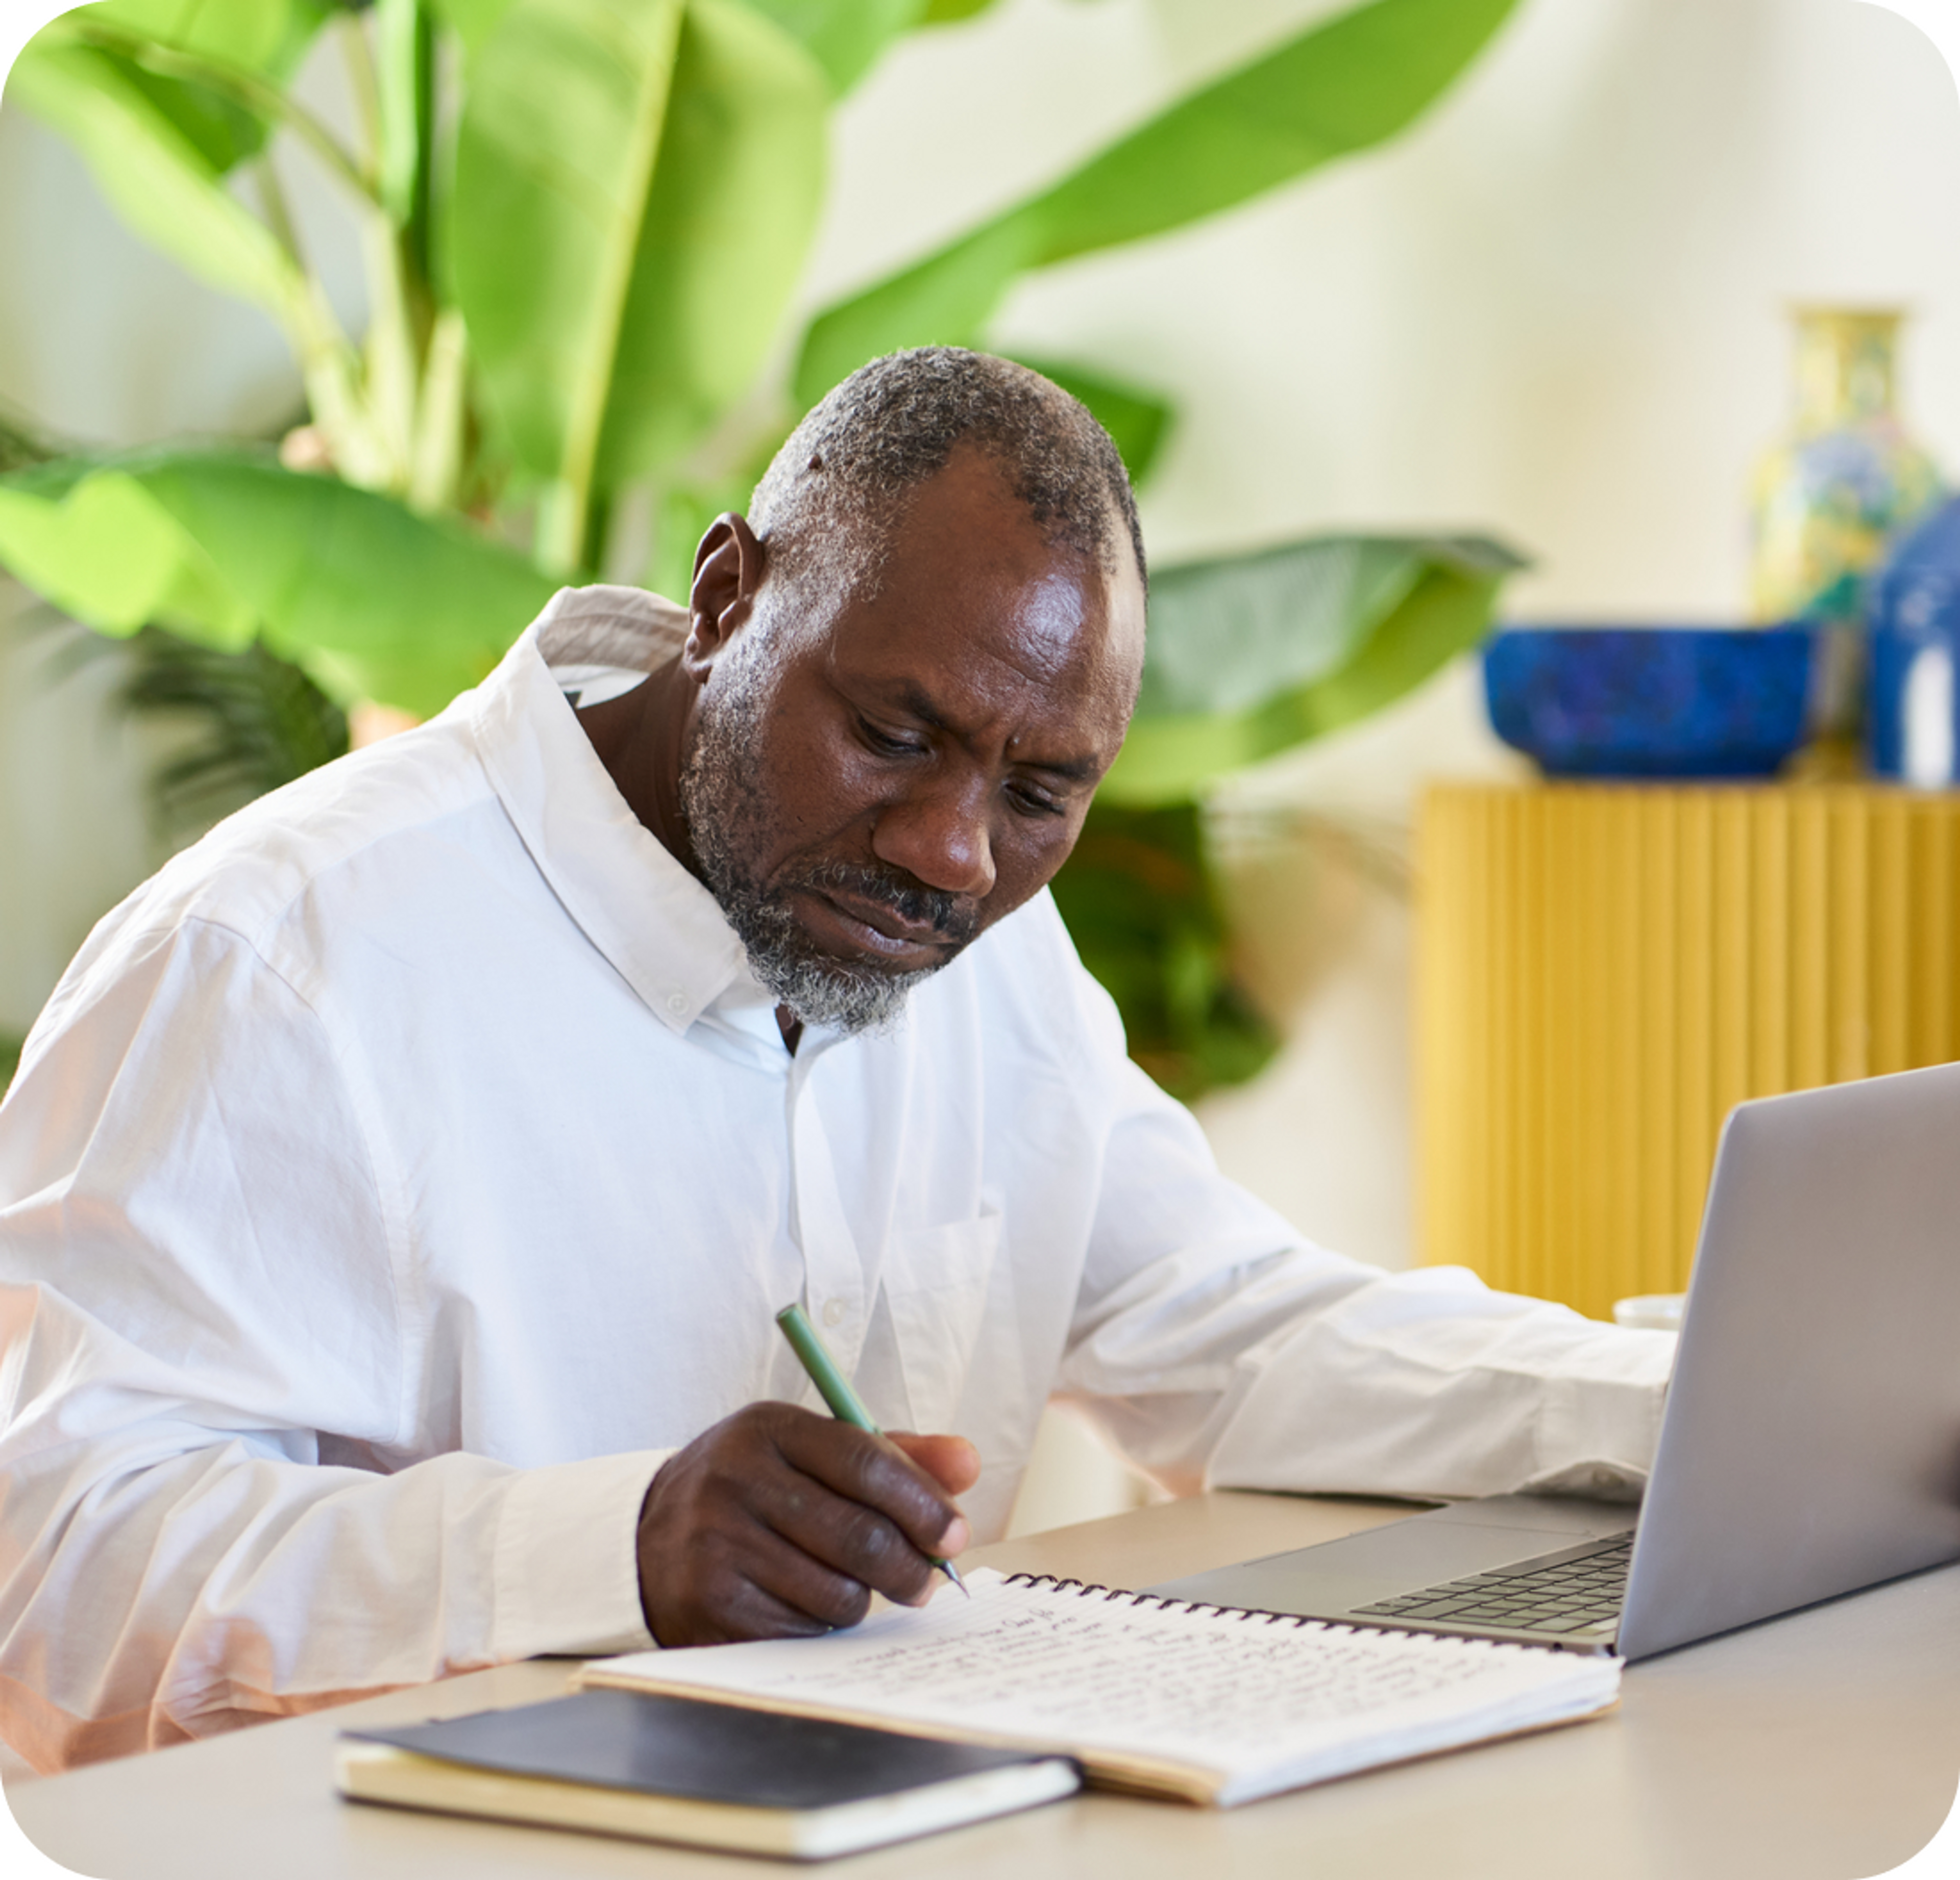 A photo of a man sat at a desk in front of a laptop and writing on a notepad